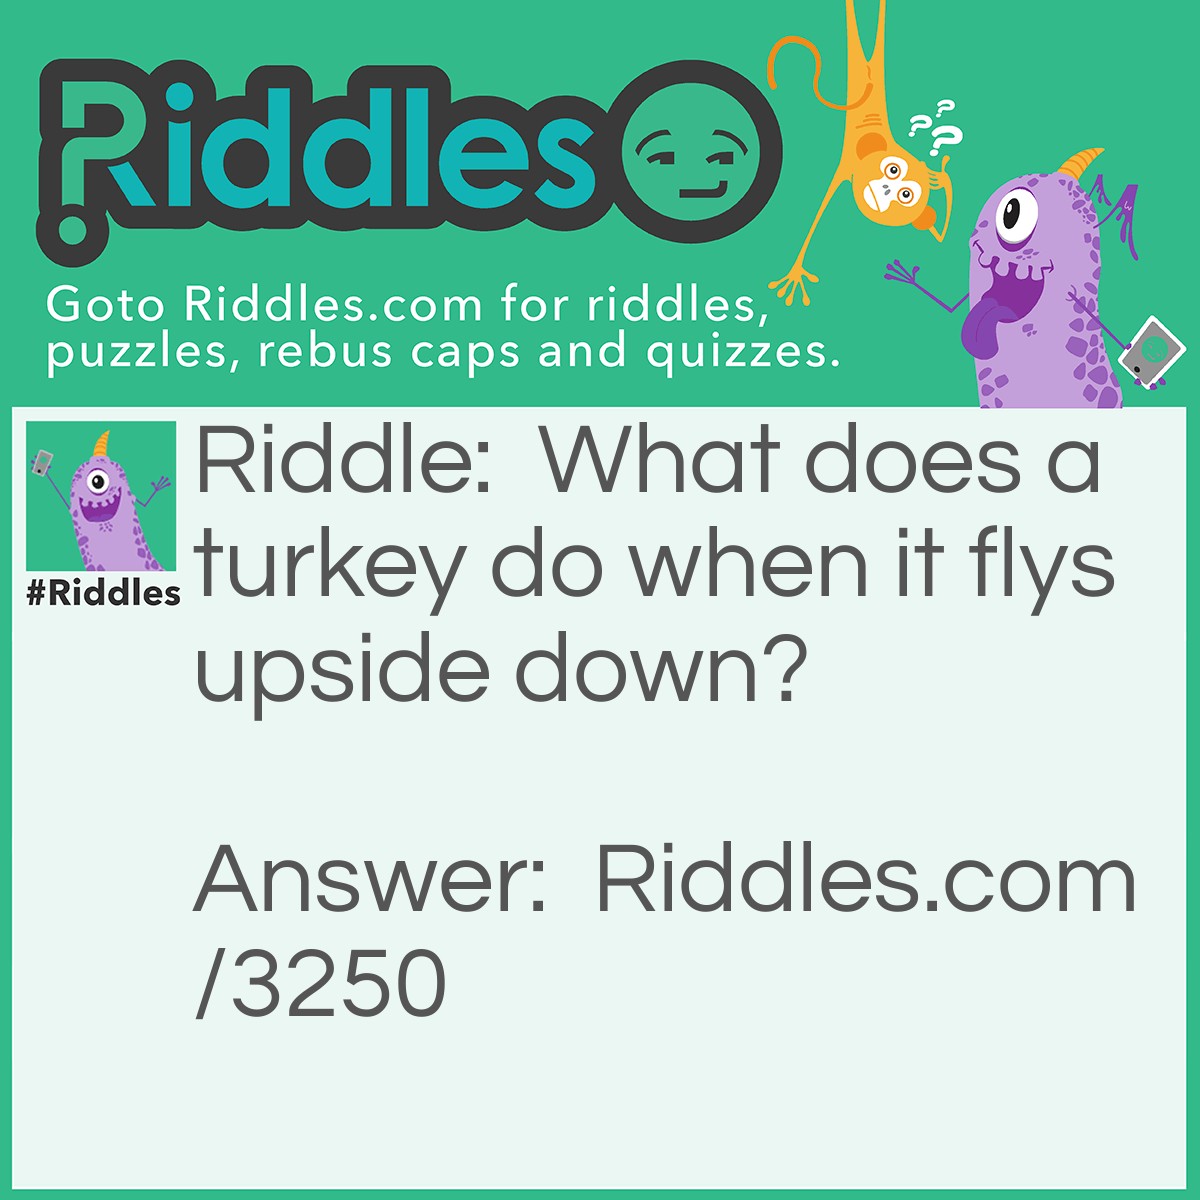 Riddle: What does a turkey do when it flys upside down? Answer: It gobbles up.